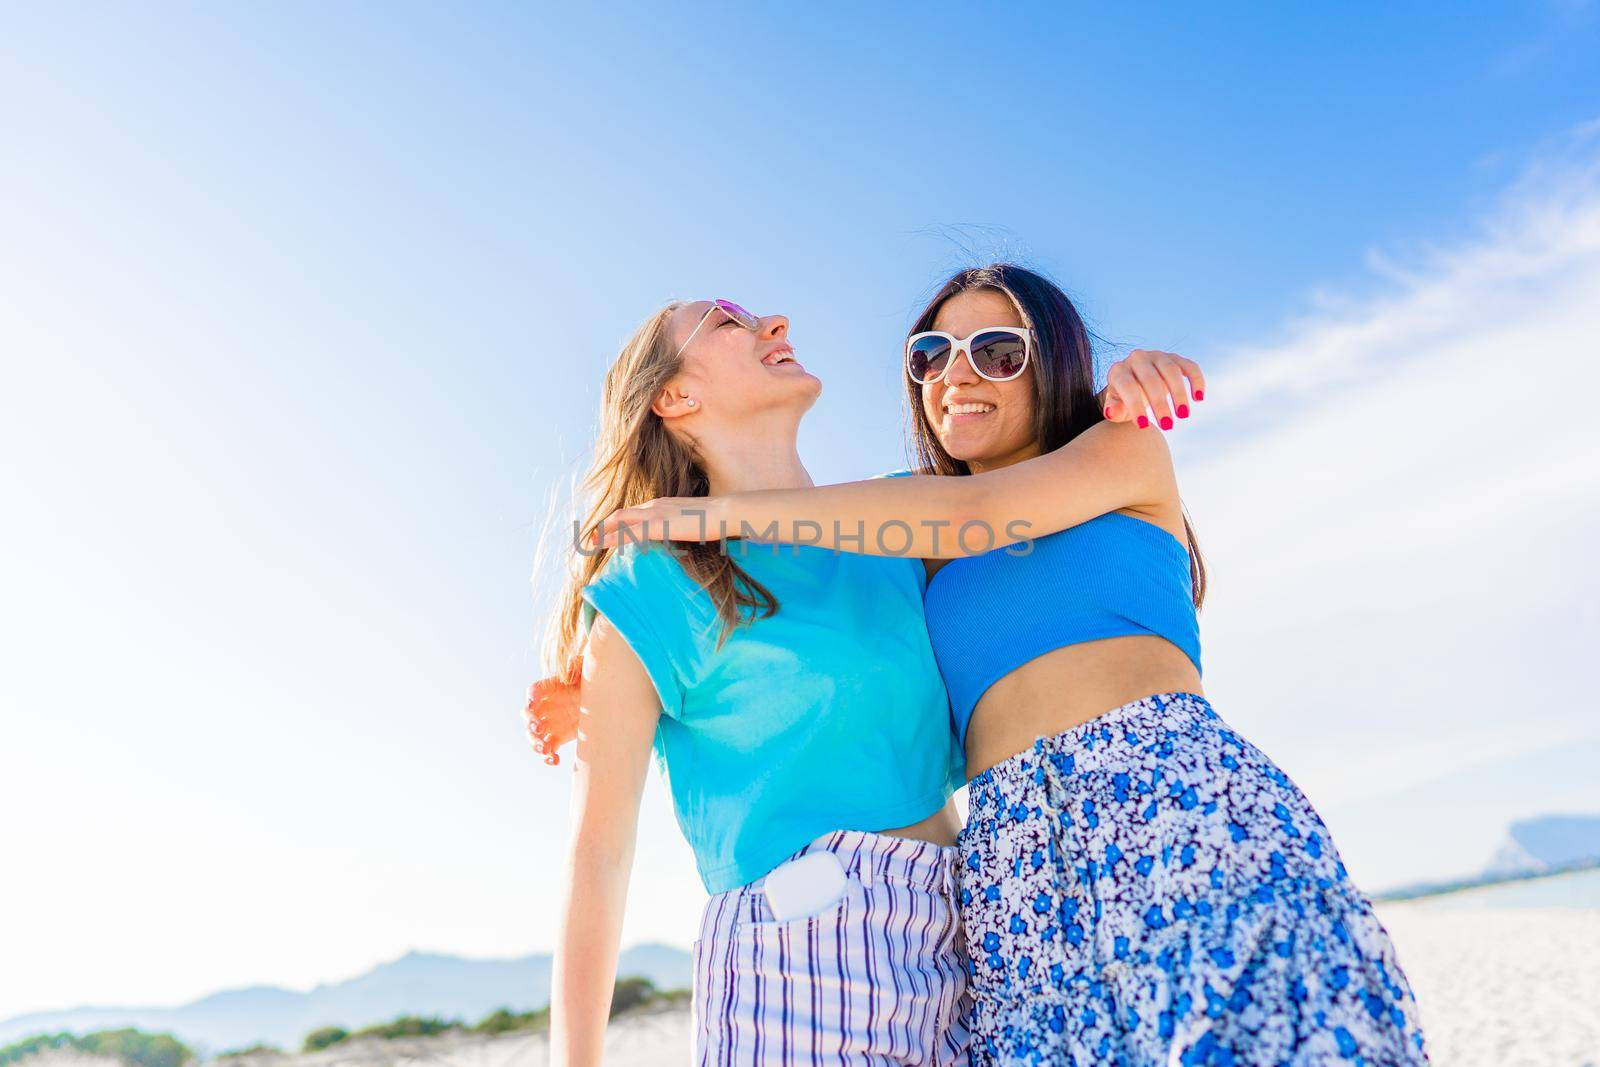 Bottom view of girls couple embracing laughing enjoying life on vacations at sea ocean tropical resort. Glamour photography of two 20s young women hugging on beach in summer travel. Happiness concept